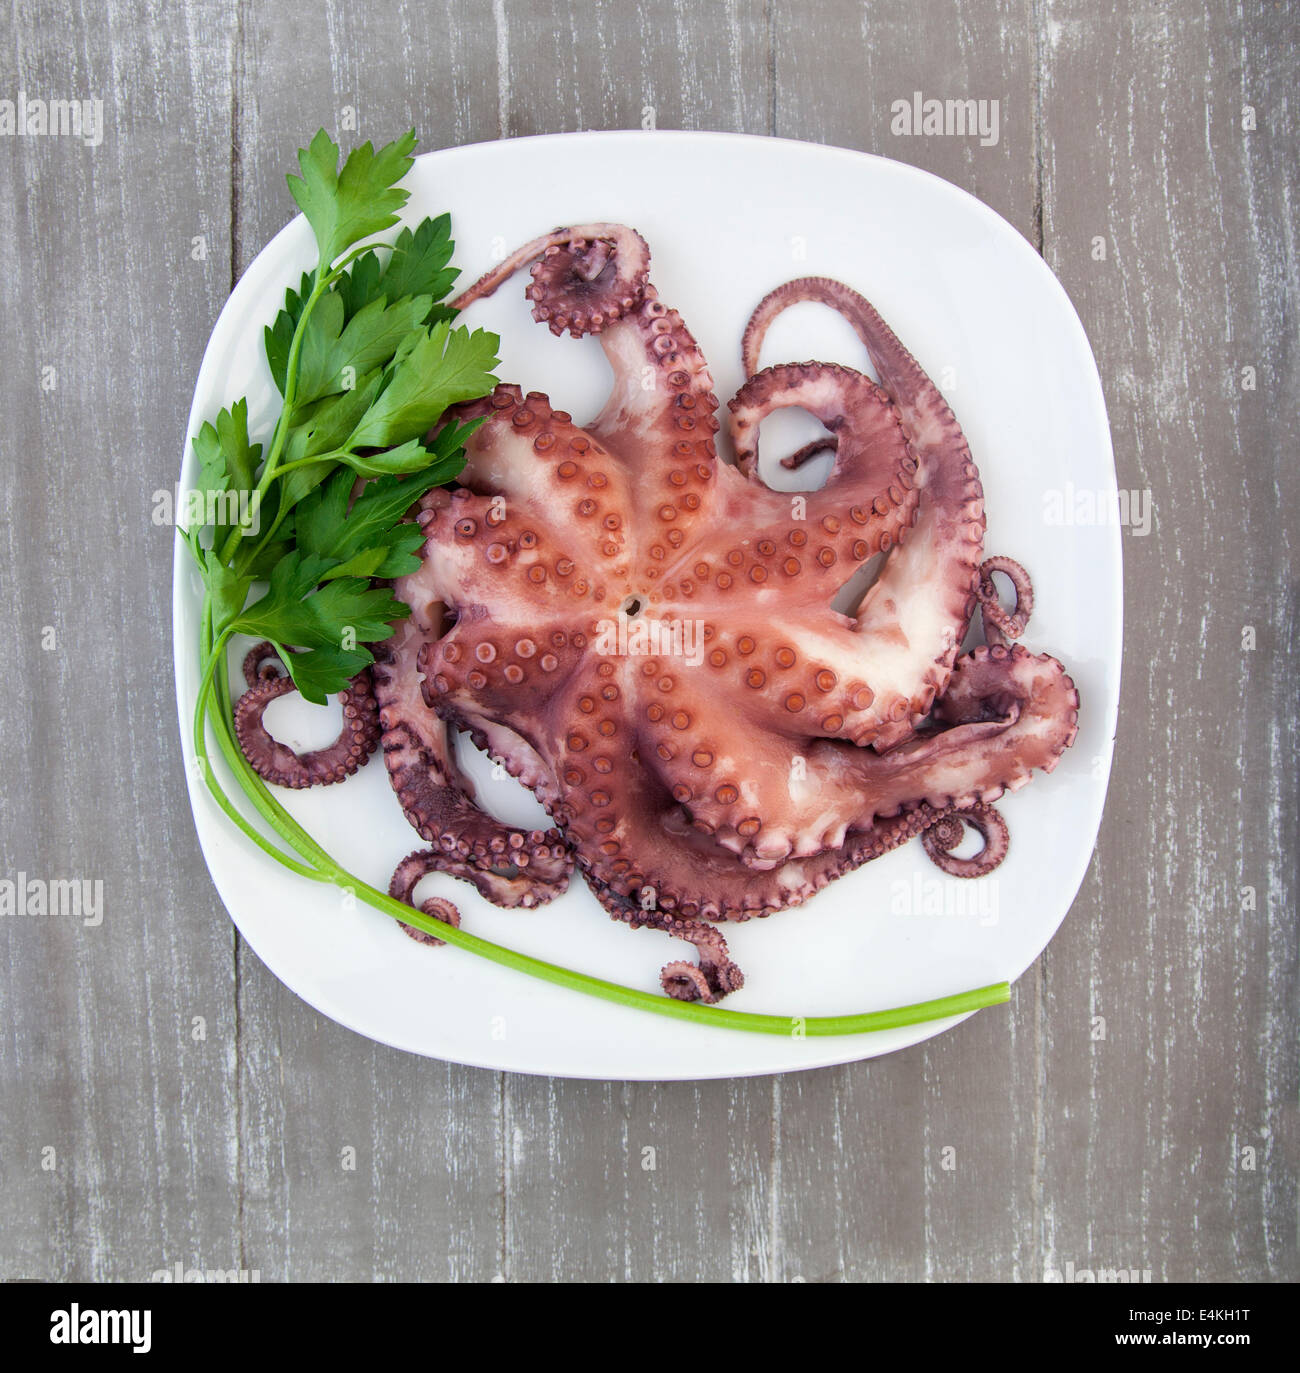 Octopus and parsley leaves on a plate Stock Photo